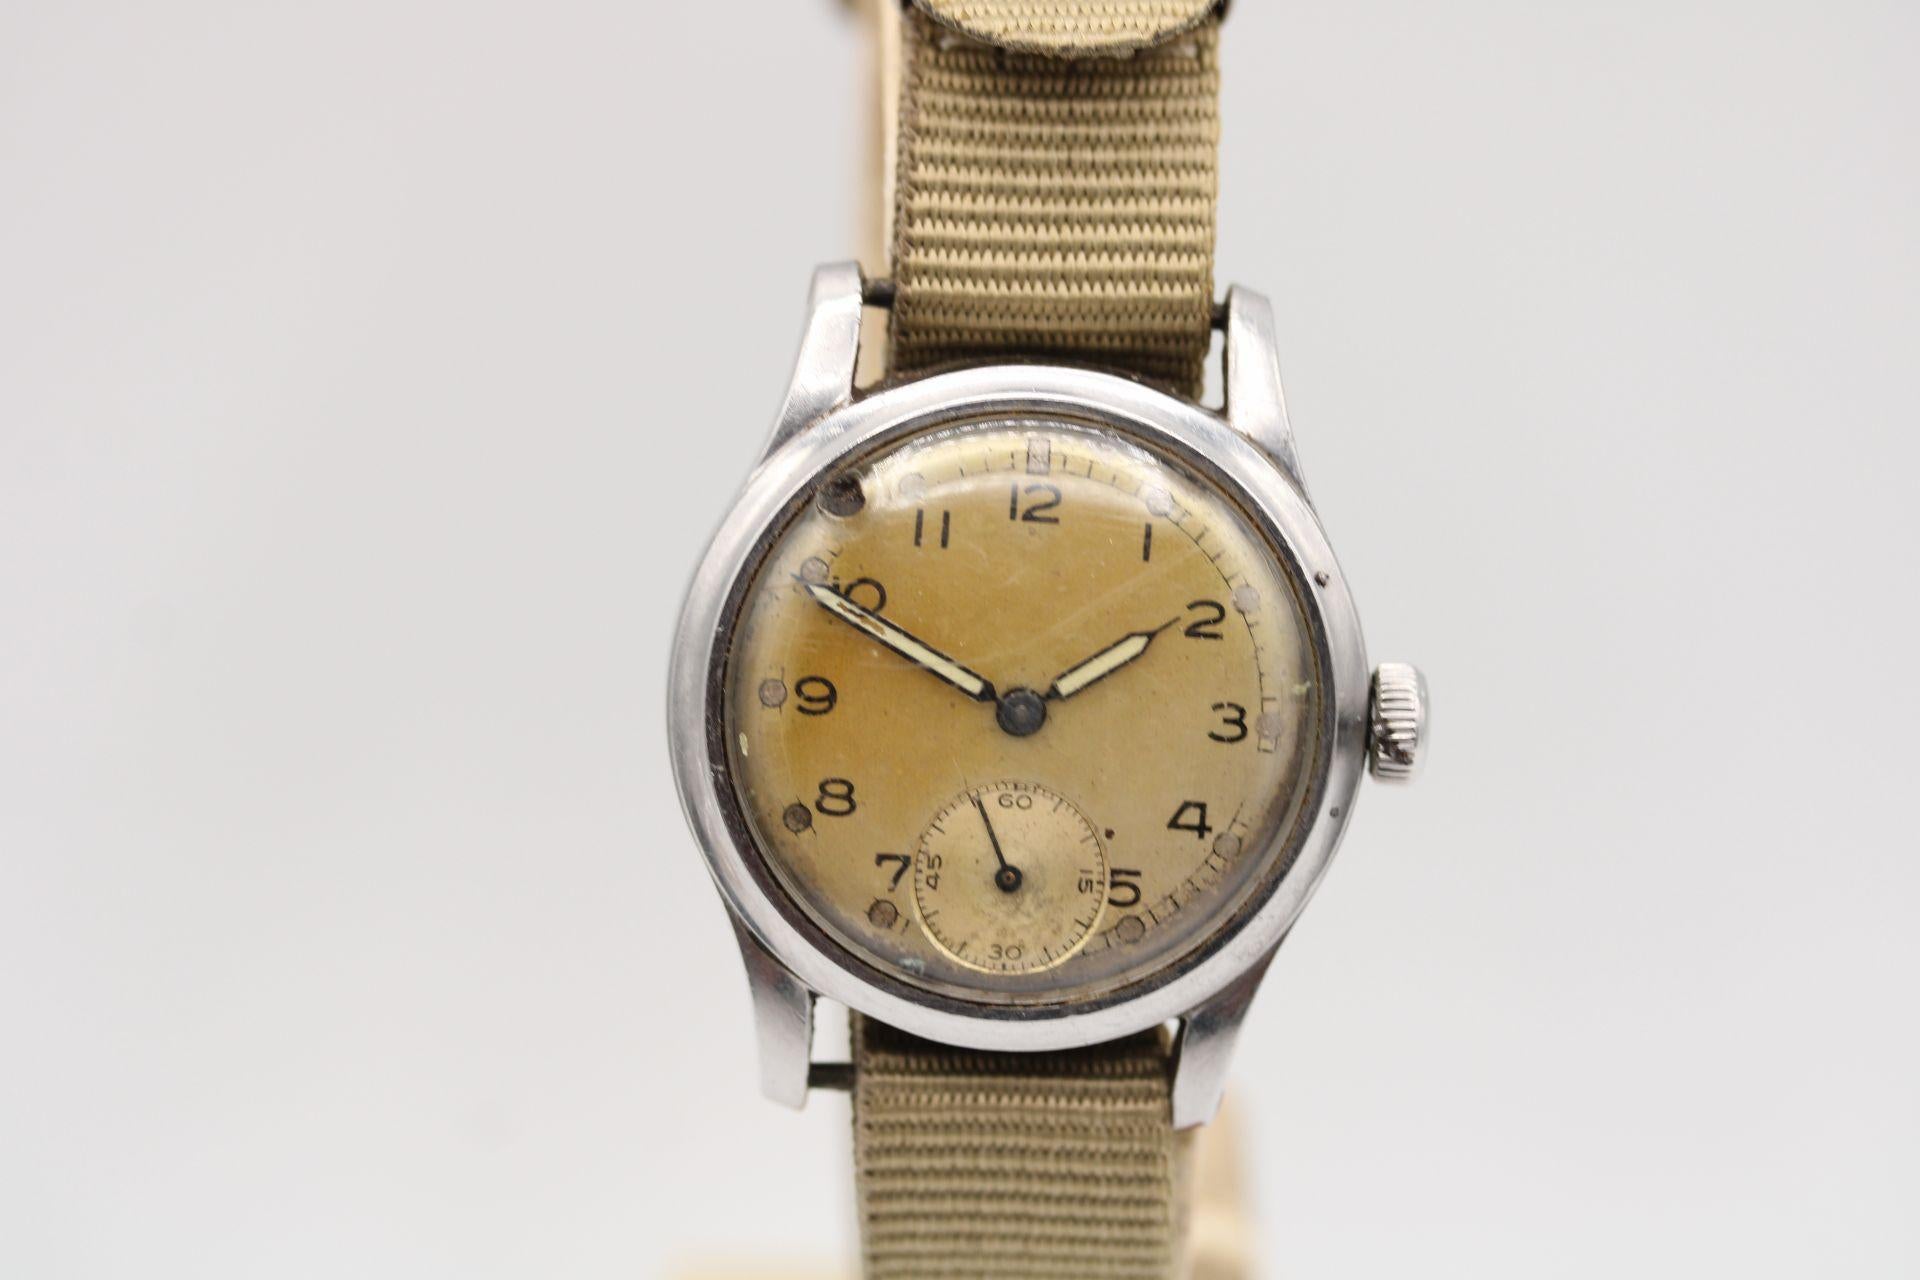 Watch: ATP British Military Unsigned
Stock Number: CHW5298
Price: £500.00

At the beginning of world war two, The British Army needed watches for its troops
fighting overseas. They acquired watches from many brands under the new Army
Trade Pattern